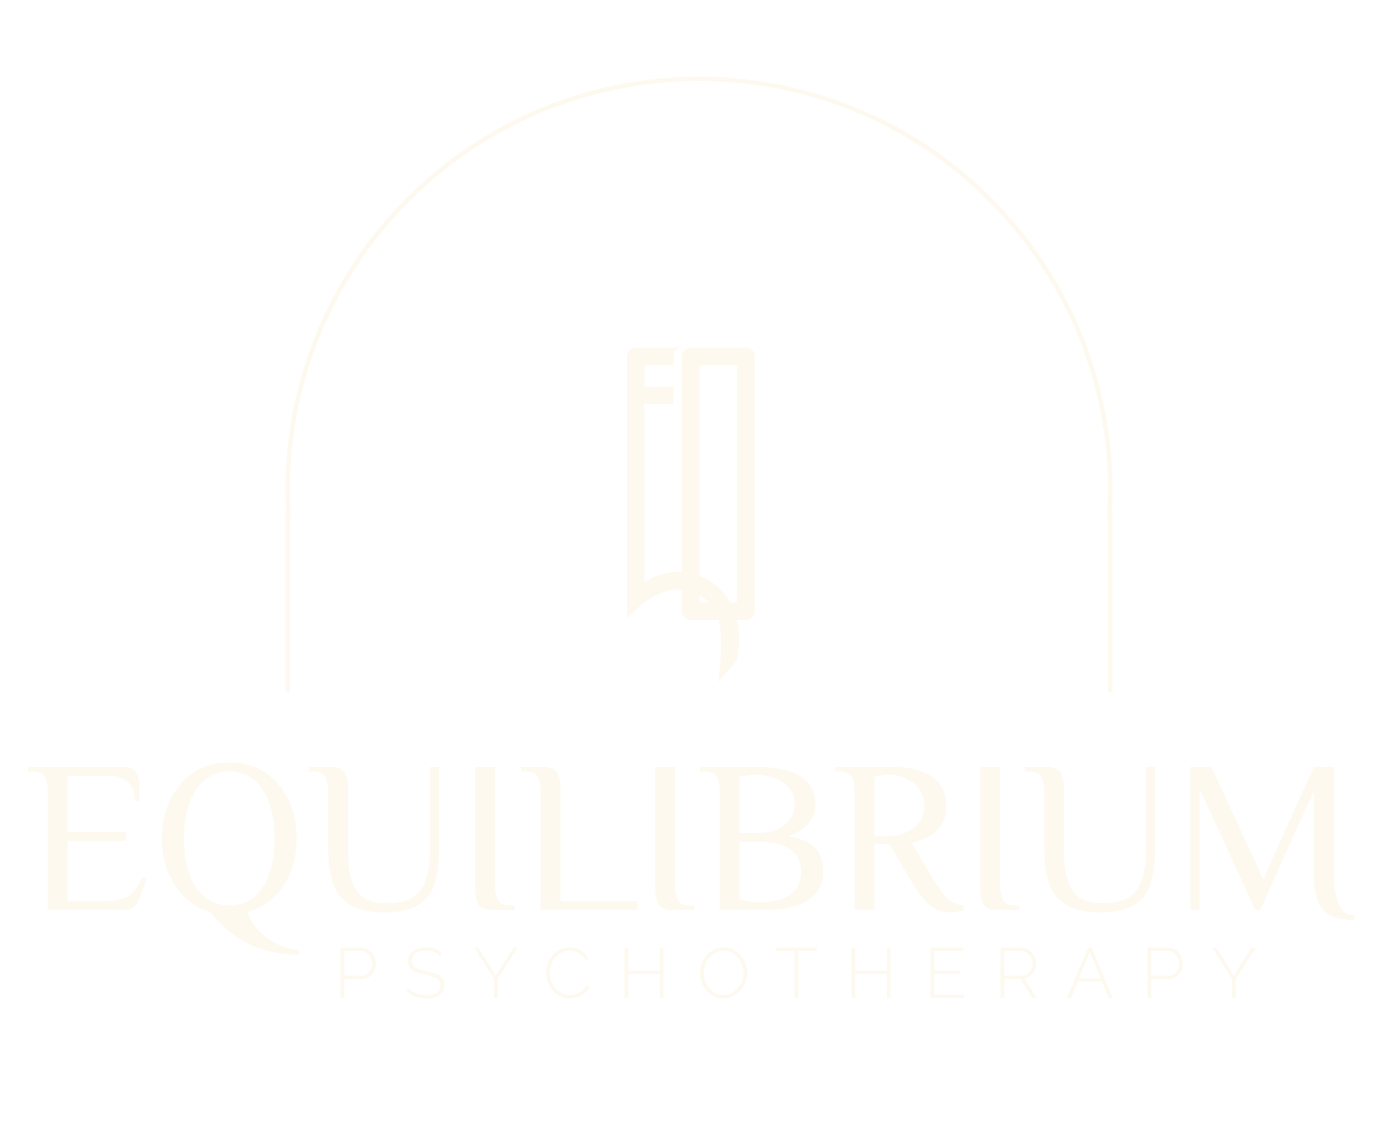 The logo for the therapy practice Equilibrium Psychotherapy LLC out of Madison, WI